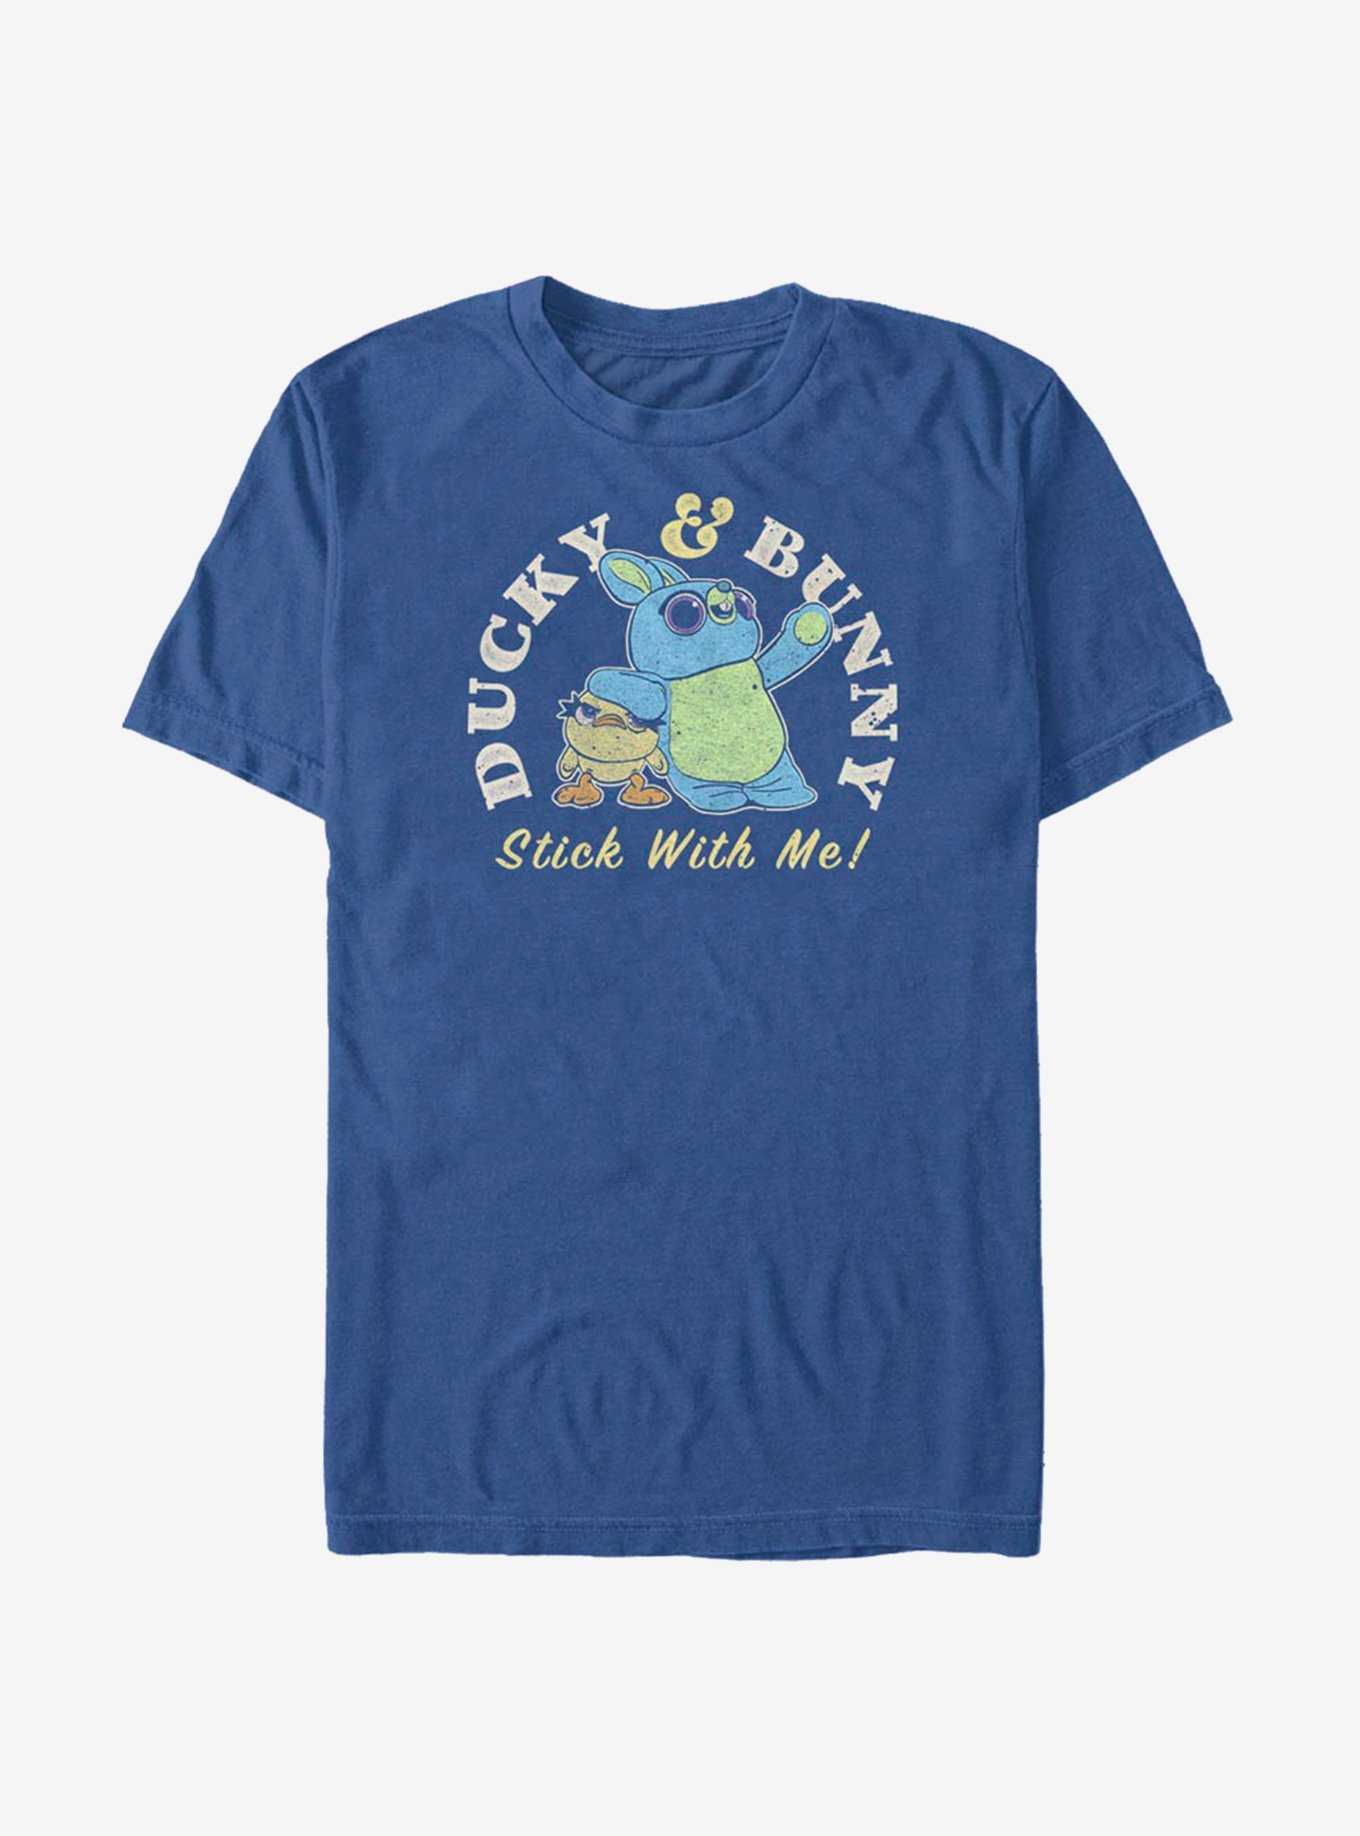 Disney Pixar Toy Story 4 Duckie And Bunny Brand T-Shirt, , hi-res